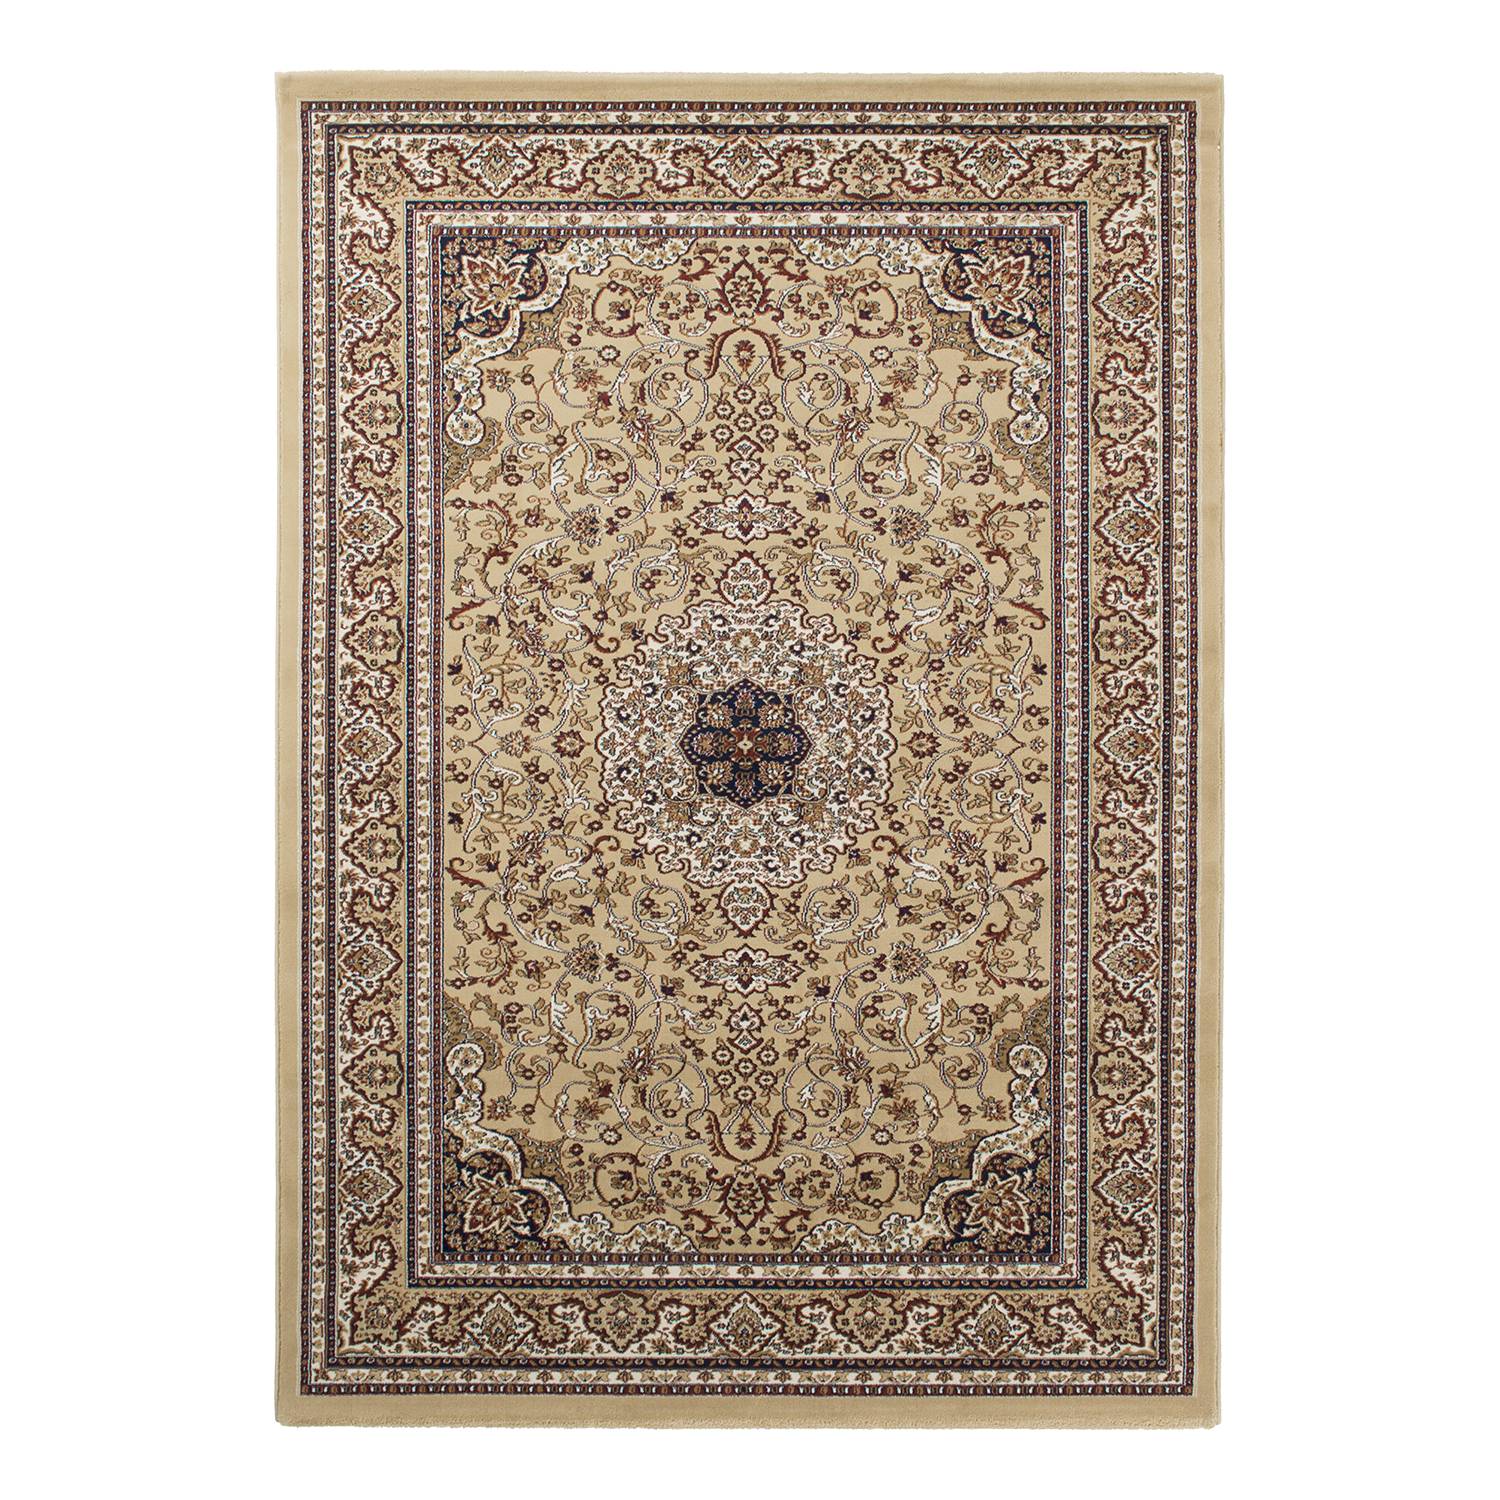 Image of Tapis Excellent 802 000000001000238999